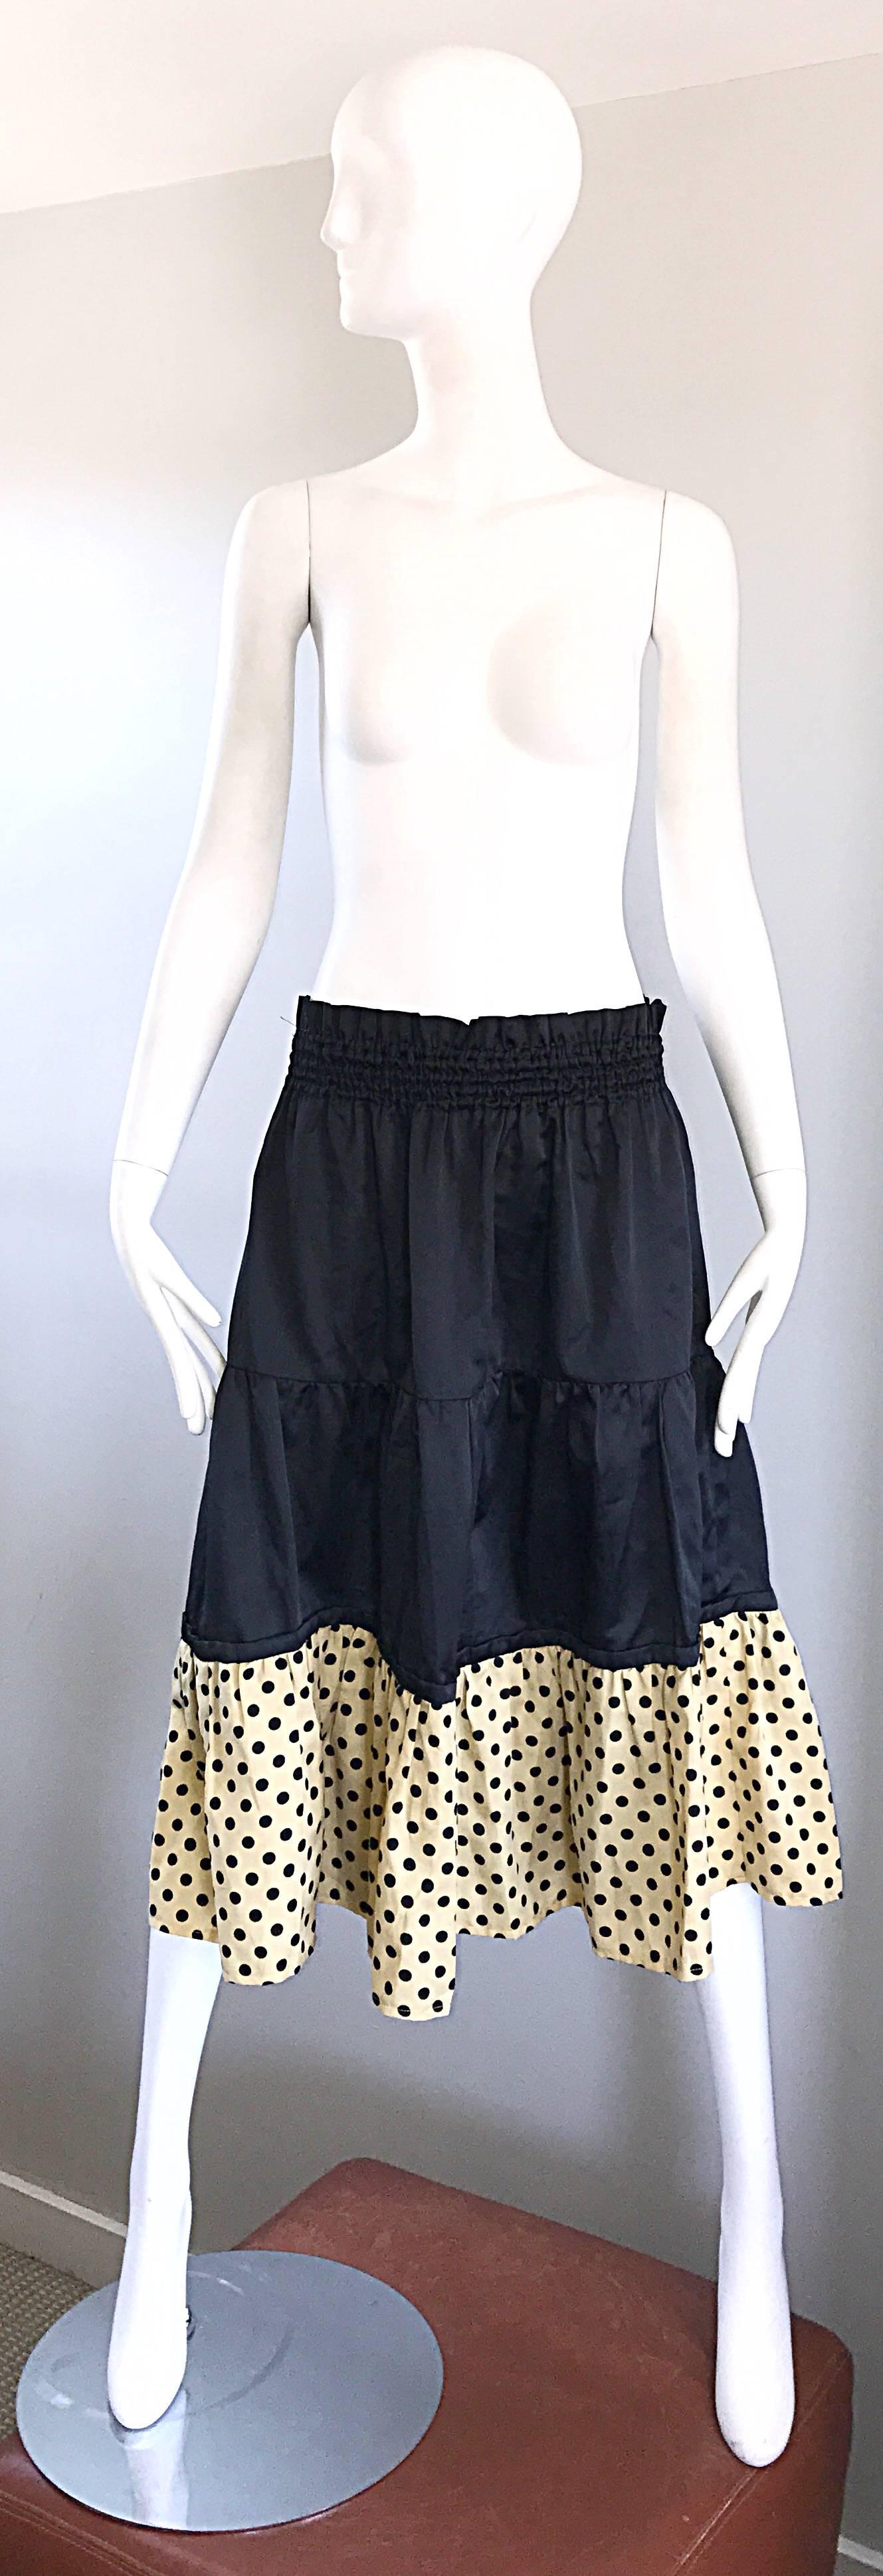 Chic 1970s PIERRE CARDIN black and ivory tiered ruffle polka dot midi skirt! Elastic waistband can accomodate an array of sizes. Simply slips over the head. Black tiers with and ivory and black polka dot hem. Can easily be dressed up or down. Great